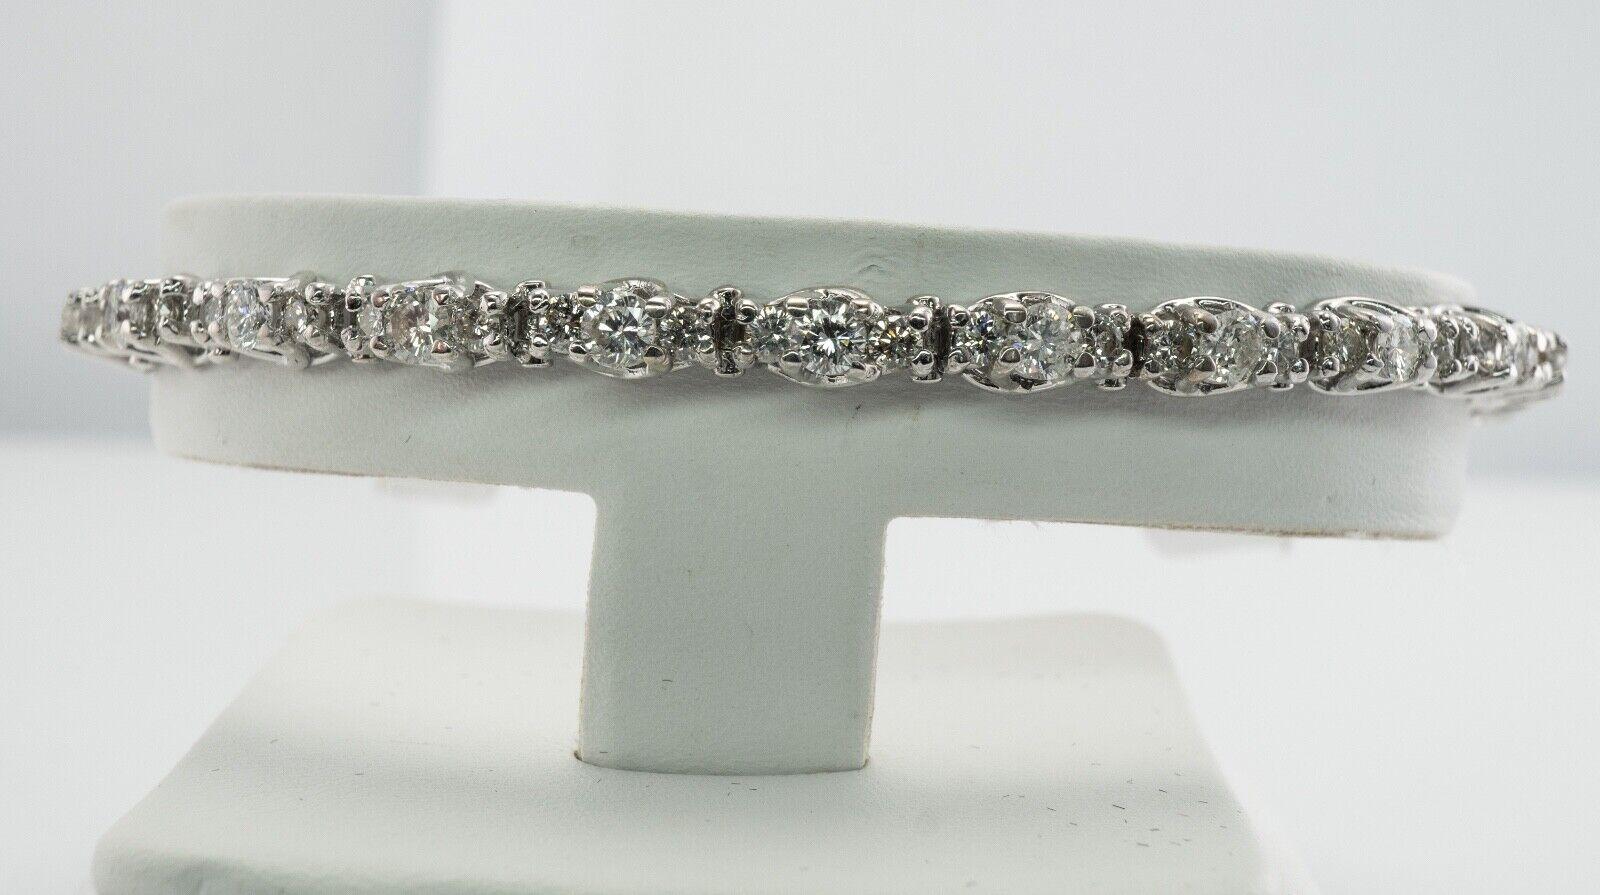 Natural Diamond Tennis Bracelet 14K White Gold 3.38 TDW

This amazing estate diamond tennis bracelet is crafted in solid 14K White gold (stamped) and set with white and fiery round brilliant cut diamonds. There are 25 diamonds totaling 2.50 carats,